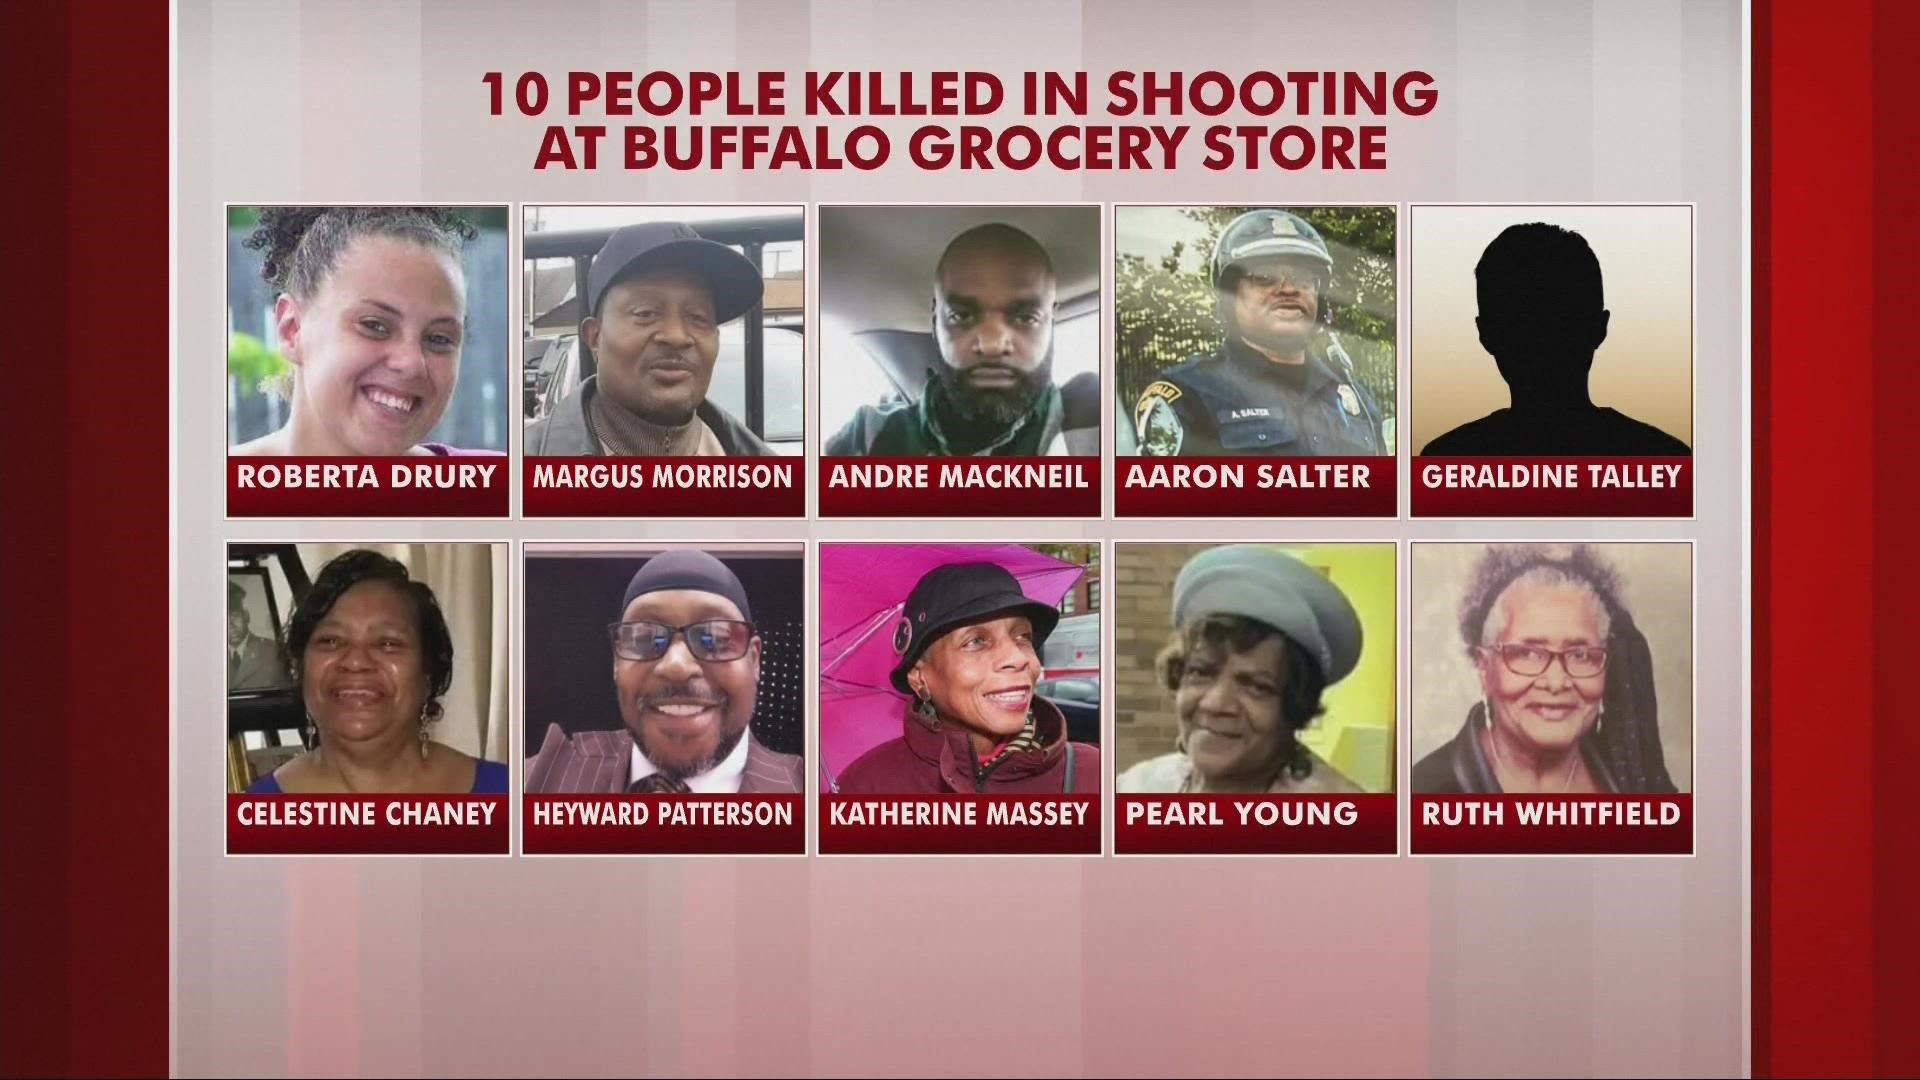 Ten people, including a retired Buffalo Police officer, were killed and three were wounded in a shooting Saturday afternoon at the Tops Market on Jefferson Ave.